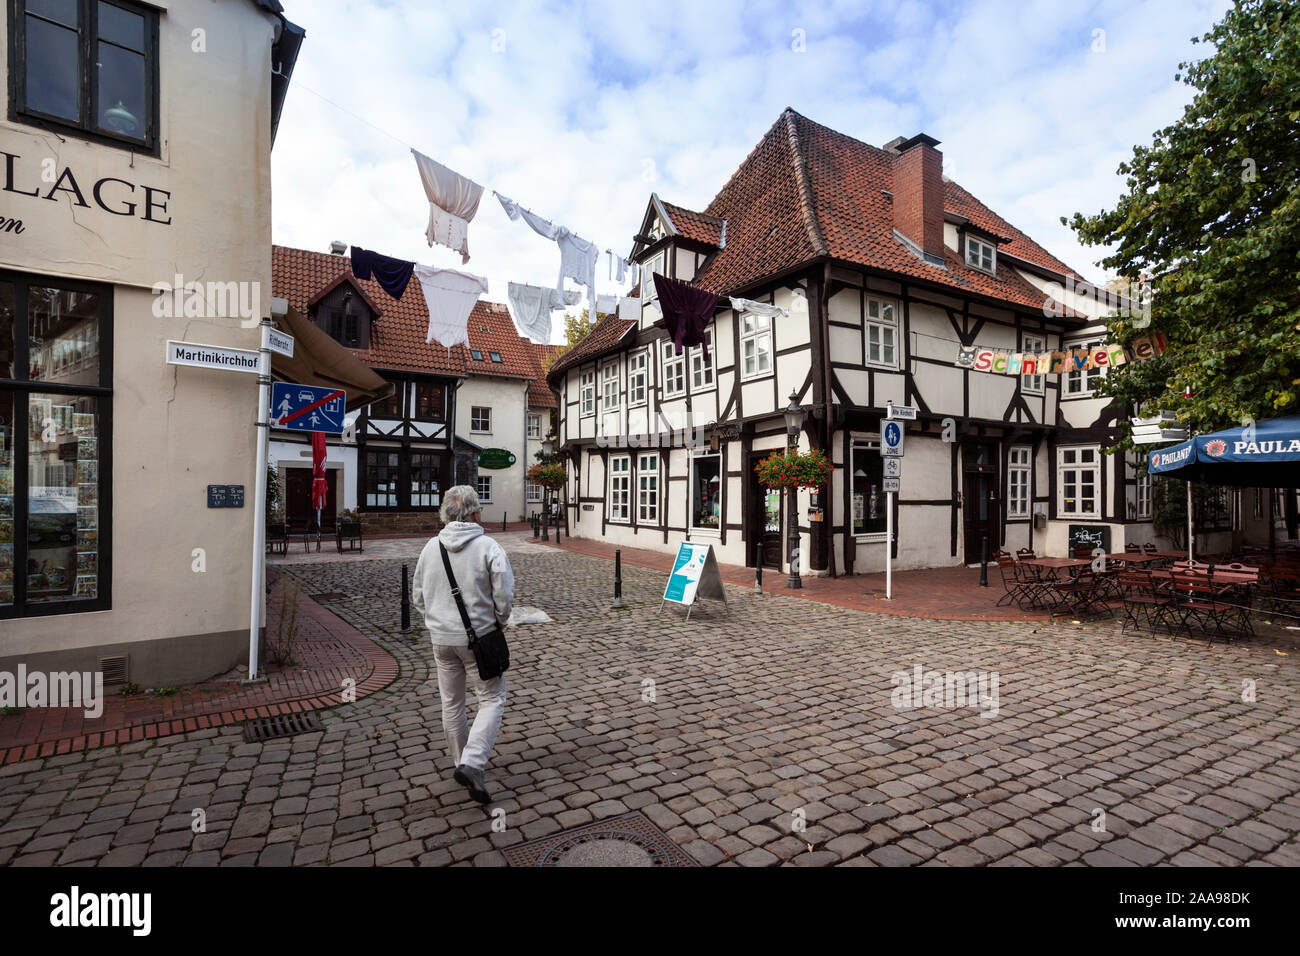 Medieval city center with half-timbered houses and alleyways in Minden Stock Photo